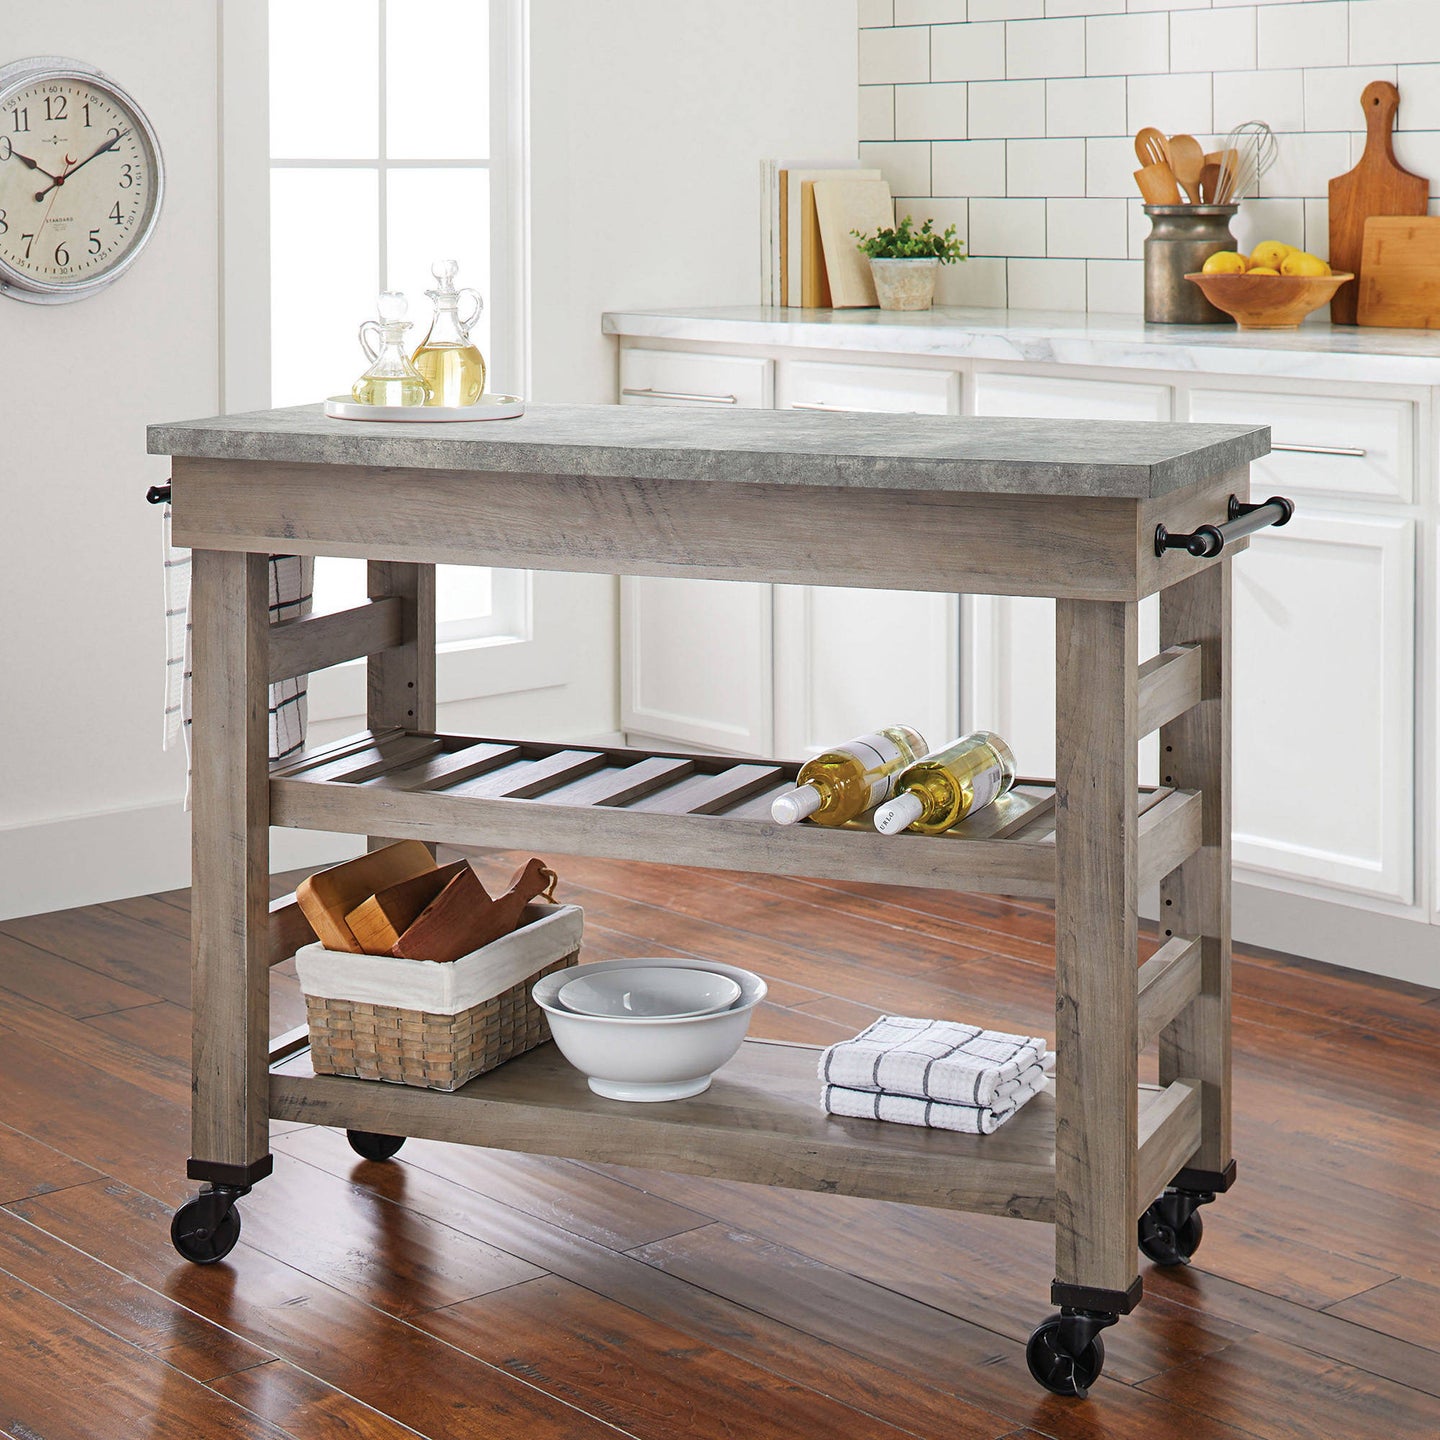 Country style kitchen island